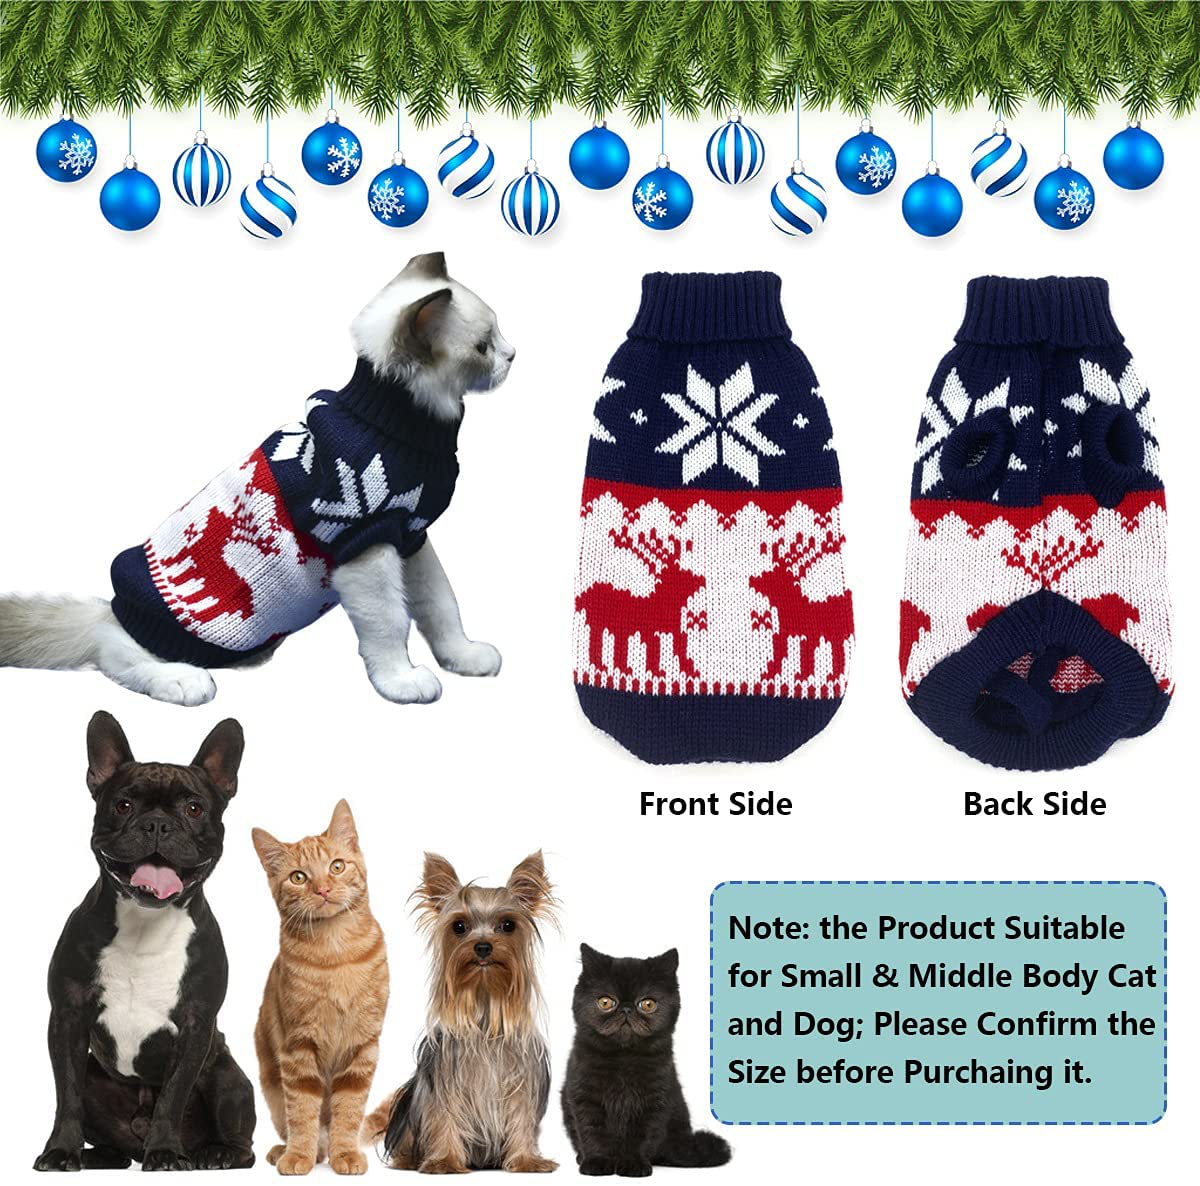 Vehomy Pet Puppy Christmas Sweater Cat Winter Knitwear Xmas Clothes Navy Blue Sweater with Reindeers Snowflakes Pattern Dog Warm Argyle Sweater Coat for Kittens Small Dogs Cats